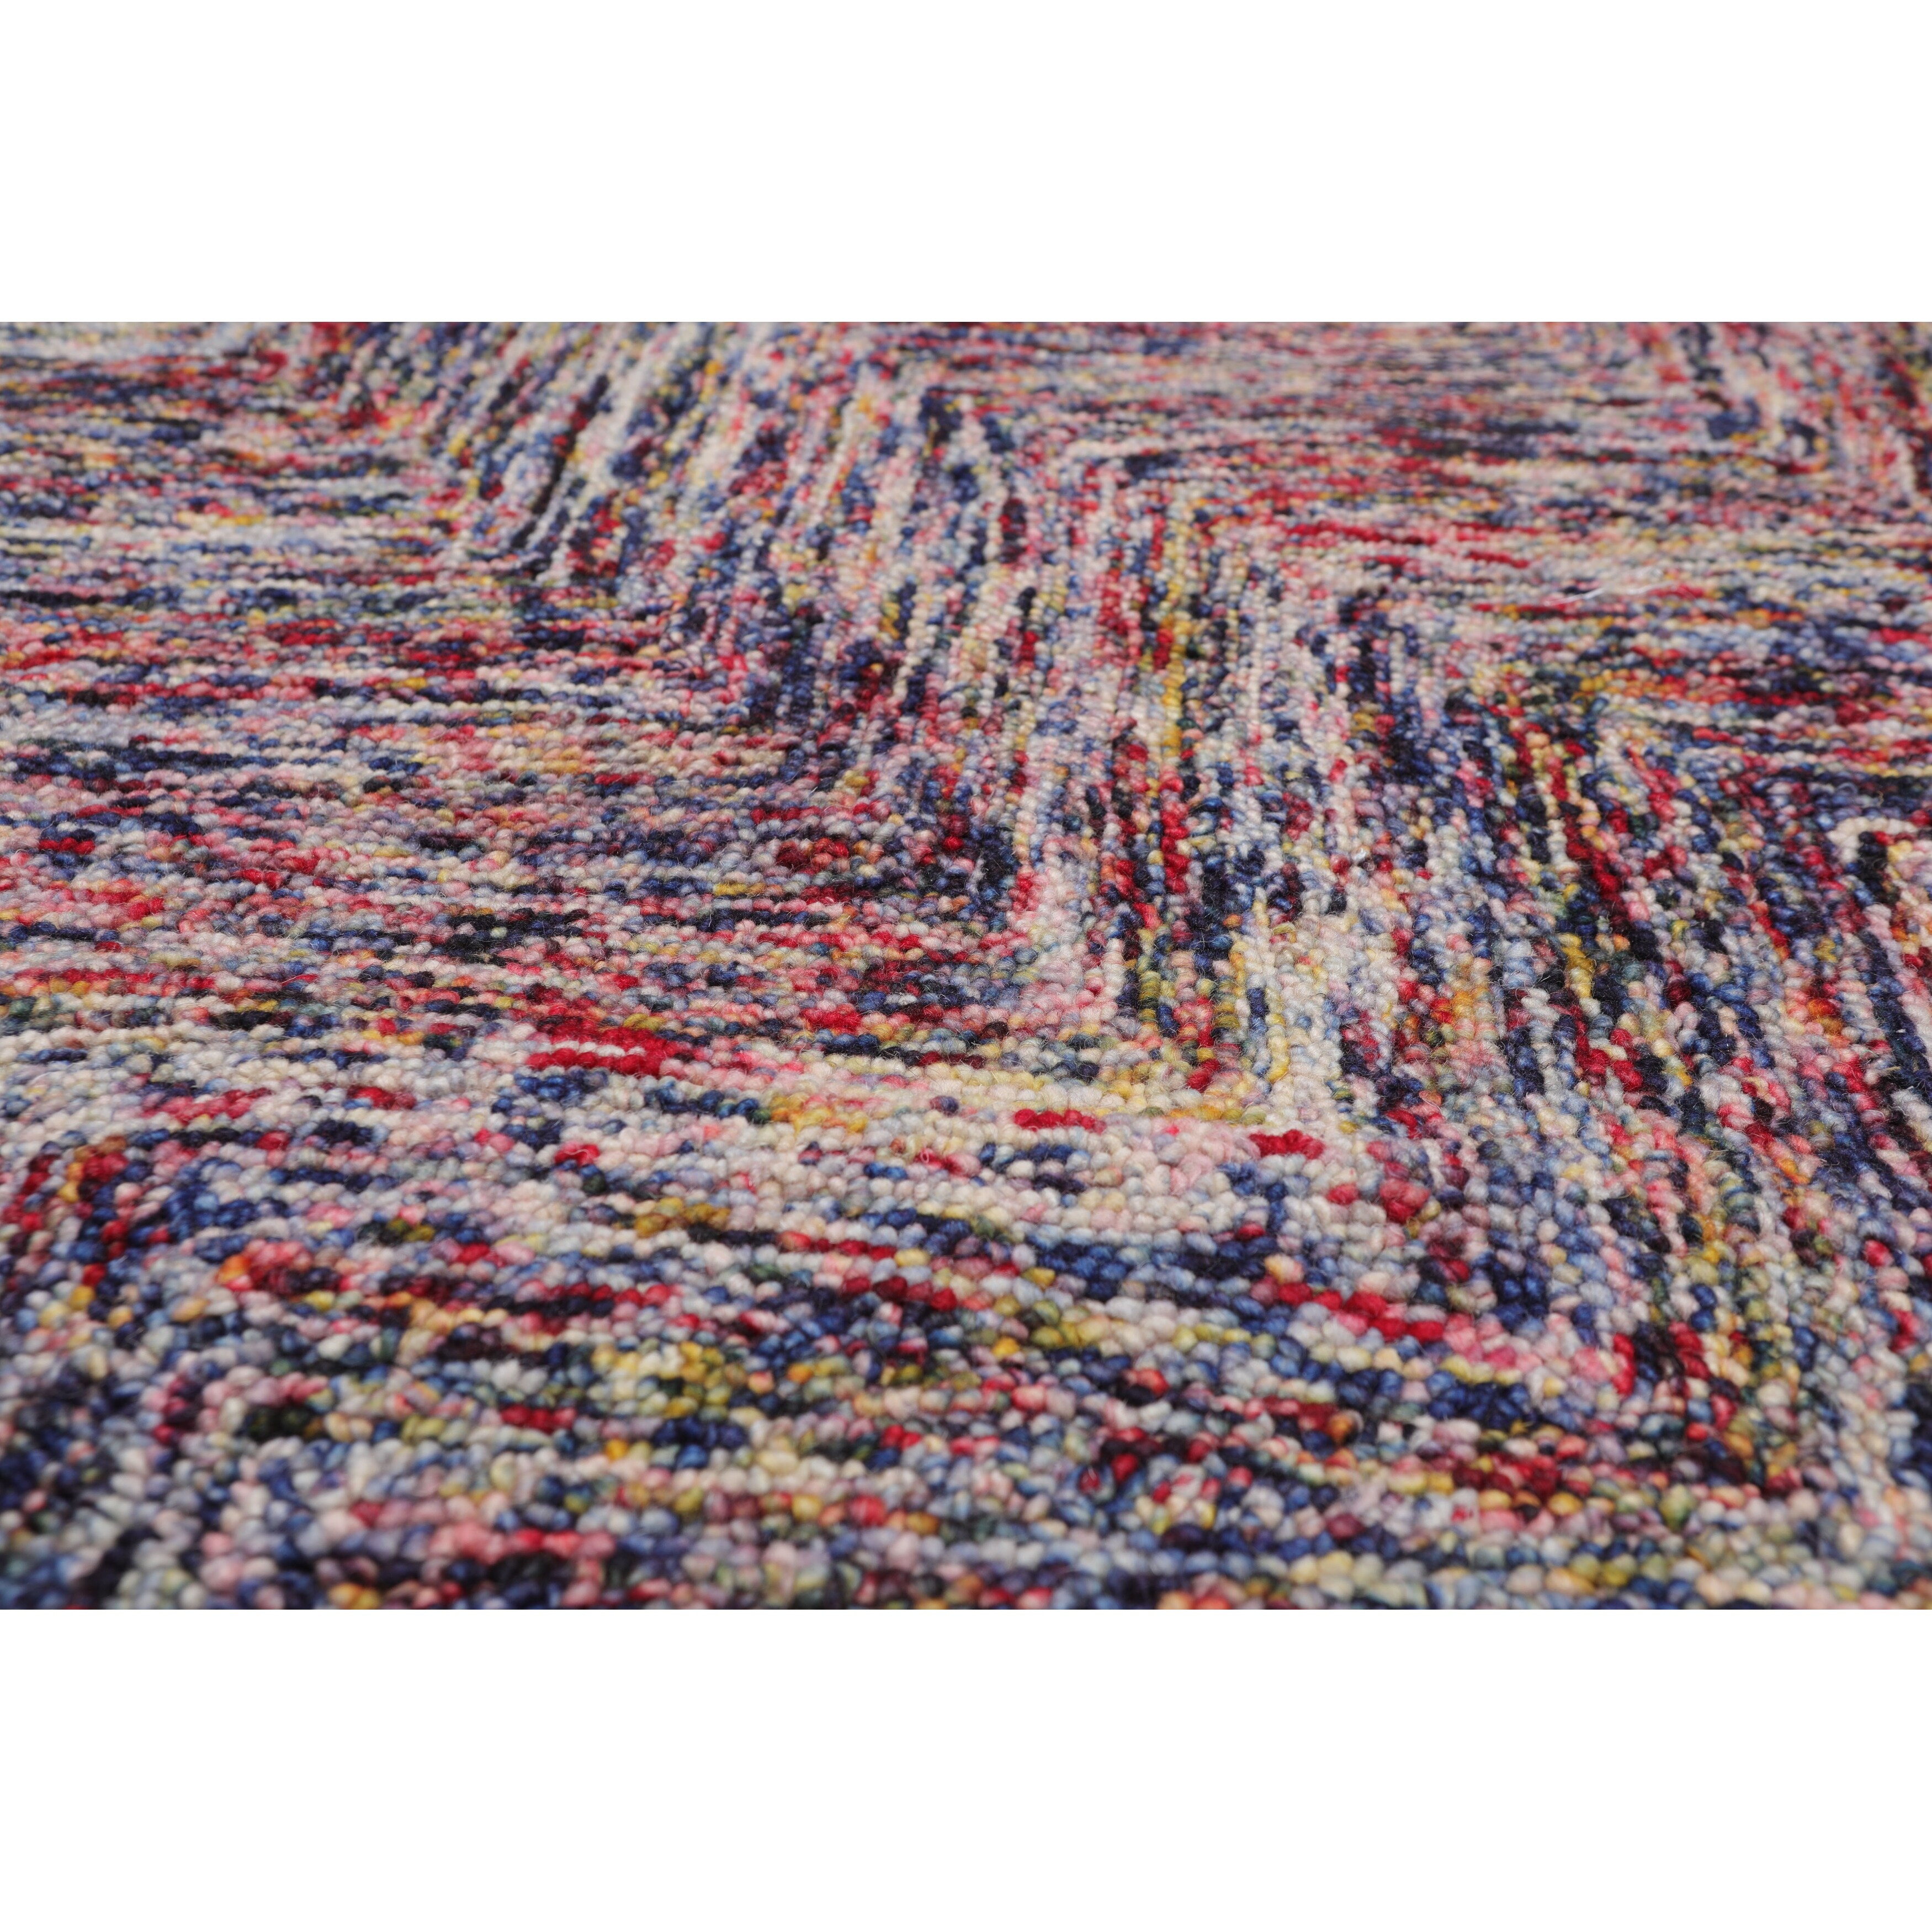 3'4x5' Hand Tufted Wool Zig Zag Medley Multi Color Wool Area Rug Oriental  Area Rug Multi Color, Color - 3'4 x 5' - On Sale - Bed Bath & Beyond -  31310769